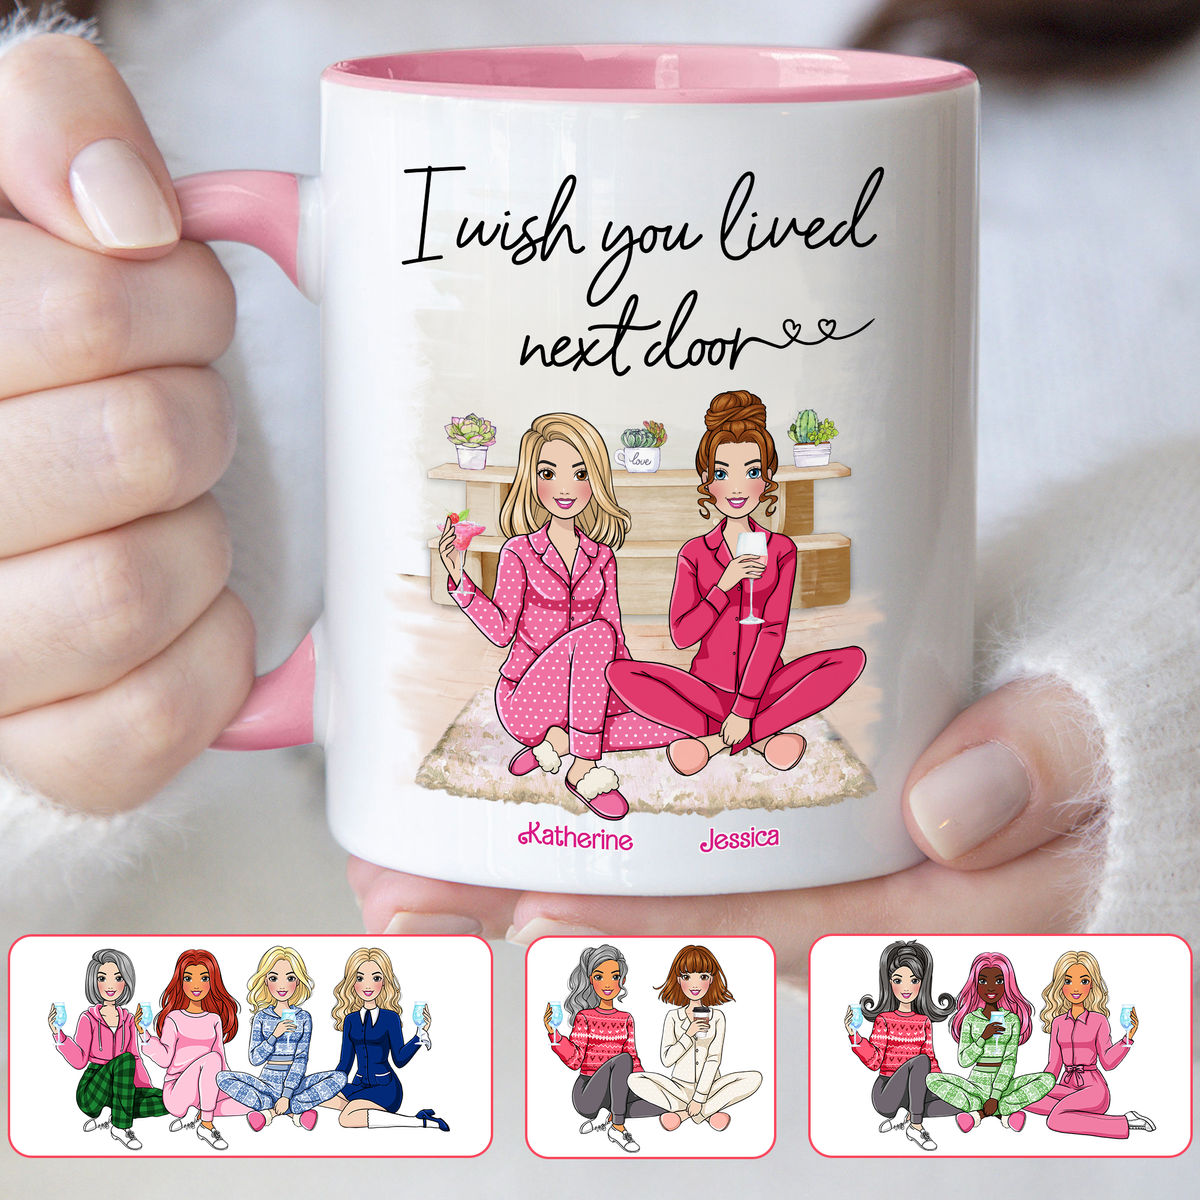 Besties Mug - I wish you lived next door - Gift for friends, gift for birthday, friends mug, gift for her, gift for sisters - Personalized Mug_1